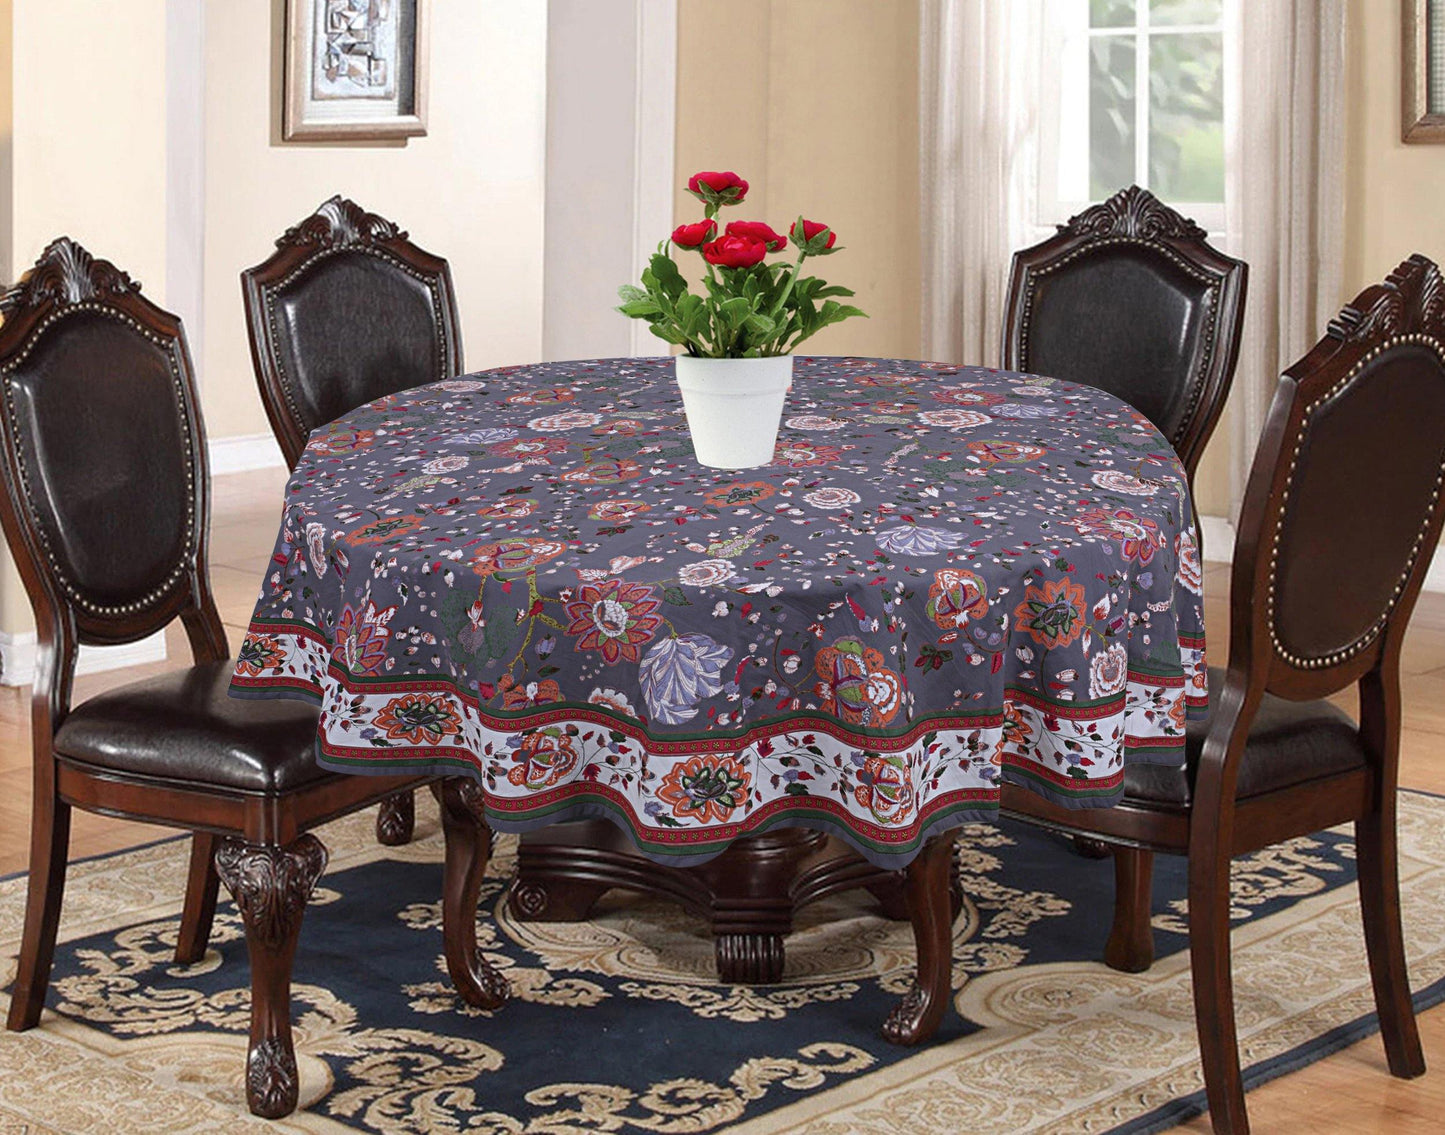 Poplin Round Center Table/Dining Table Cover 72 inches Diameter -Grey - The Teal Thread